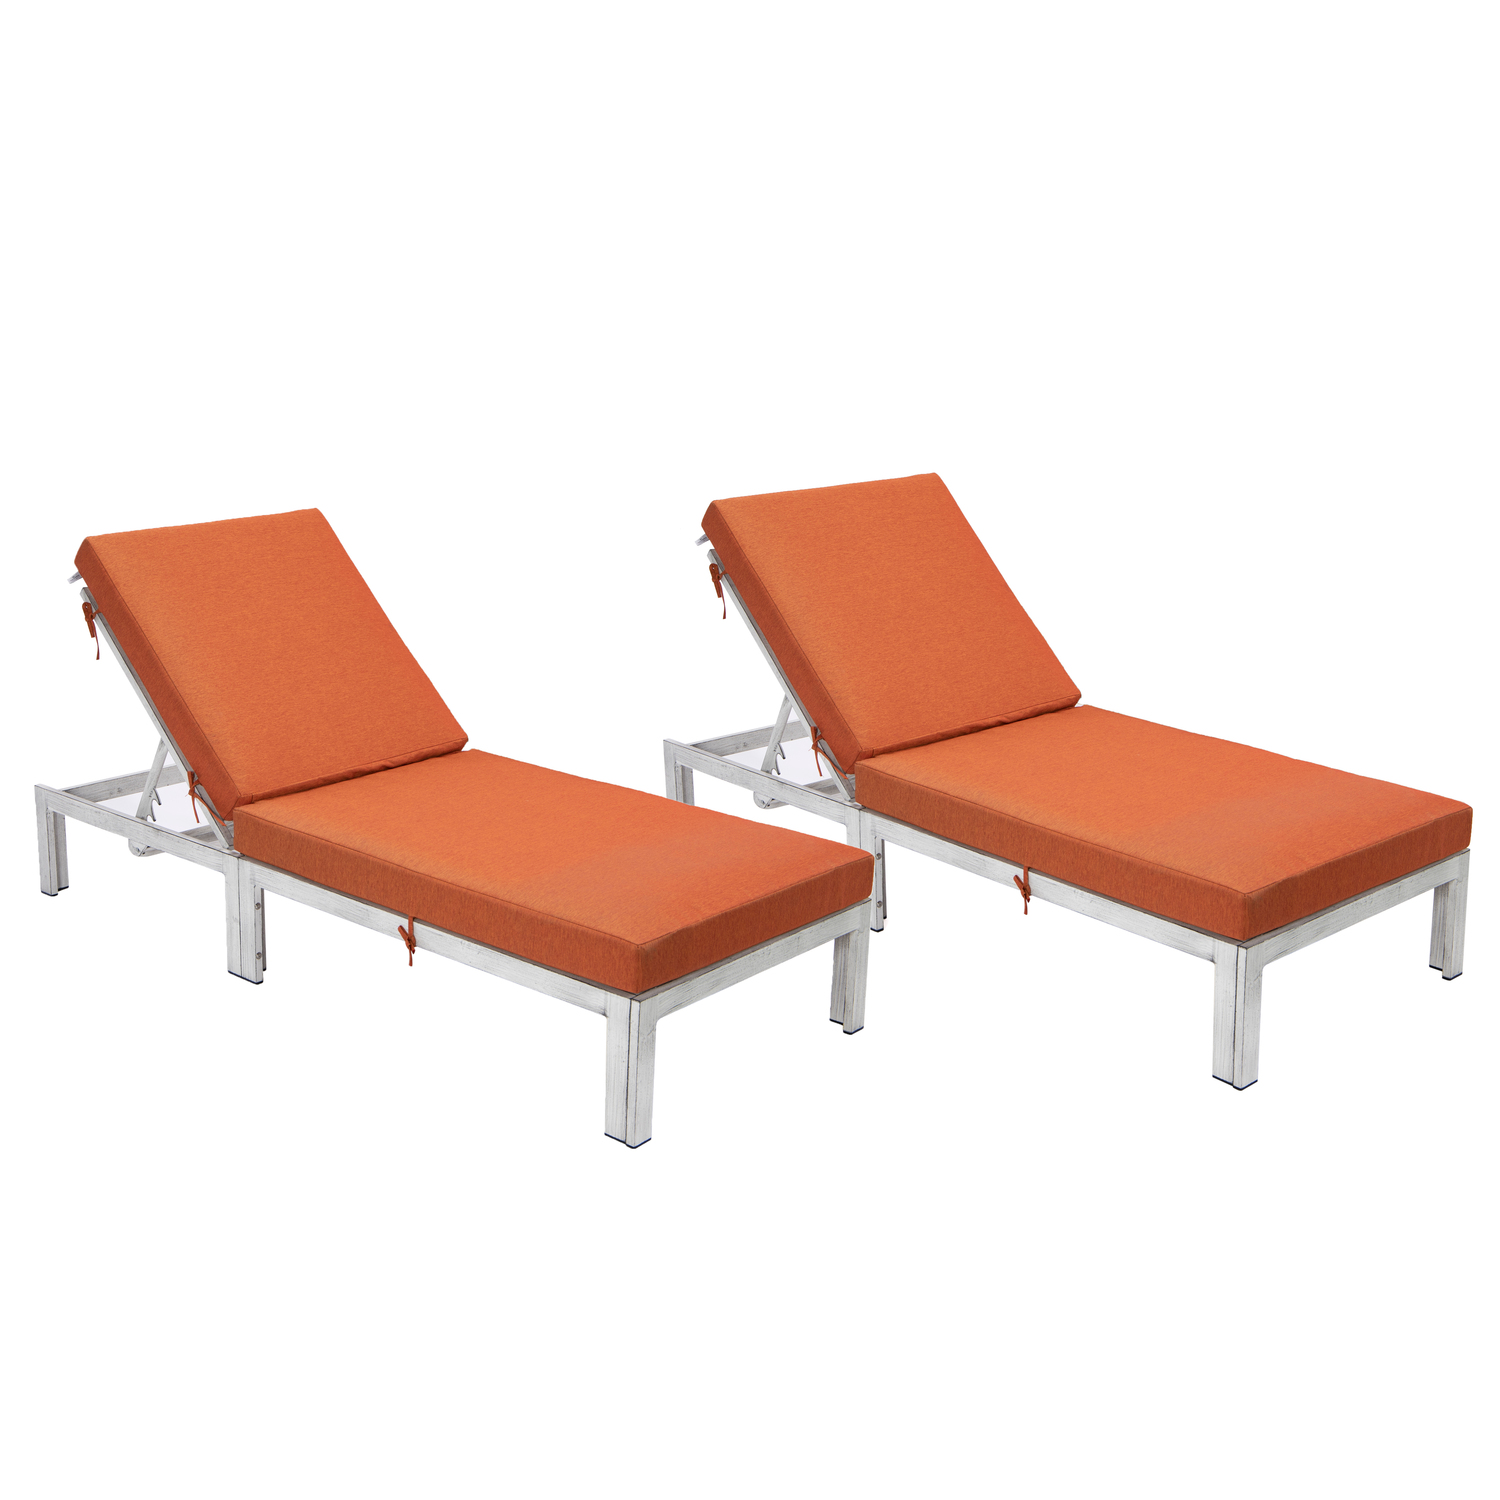 LeisureMod Chelsea Modern Weathered Grey Aluminum Outdoor Patio Chaise Lounge Chair Set of 2 With Orange Cushions - image 1 of 5